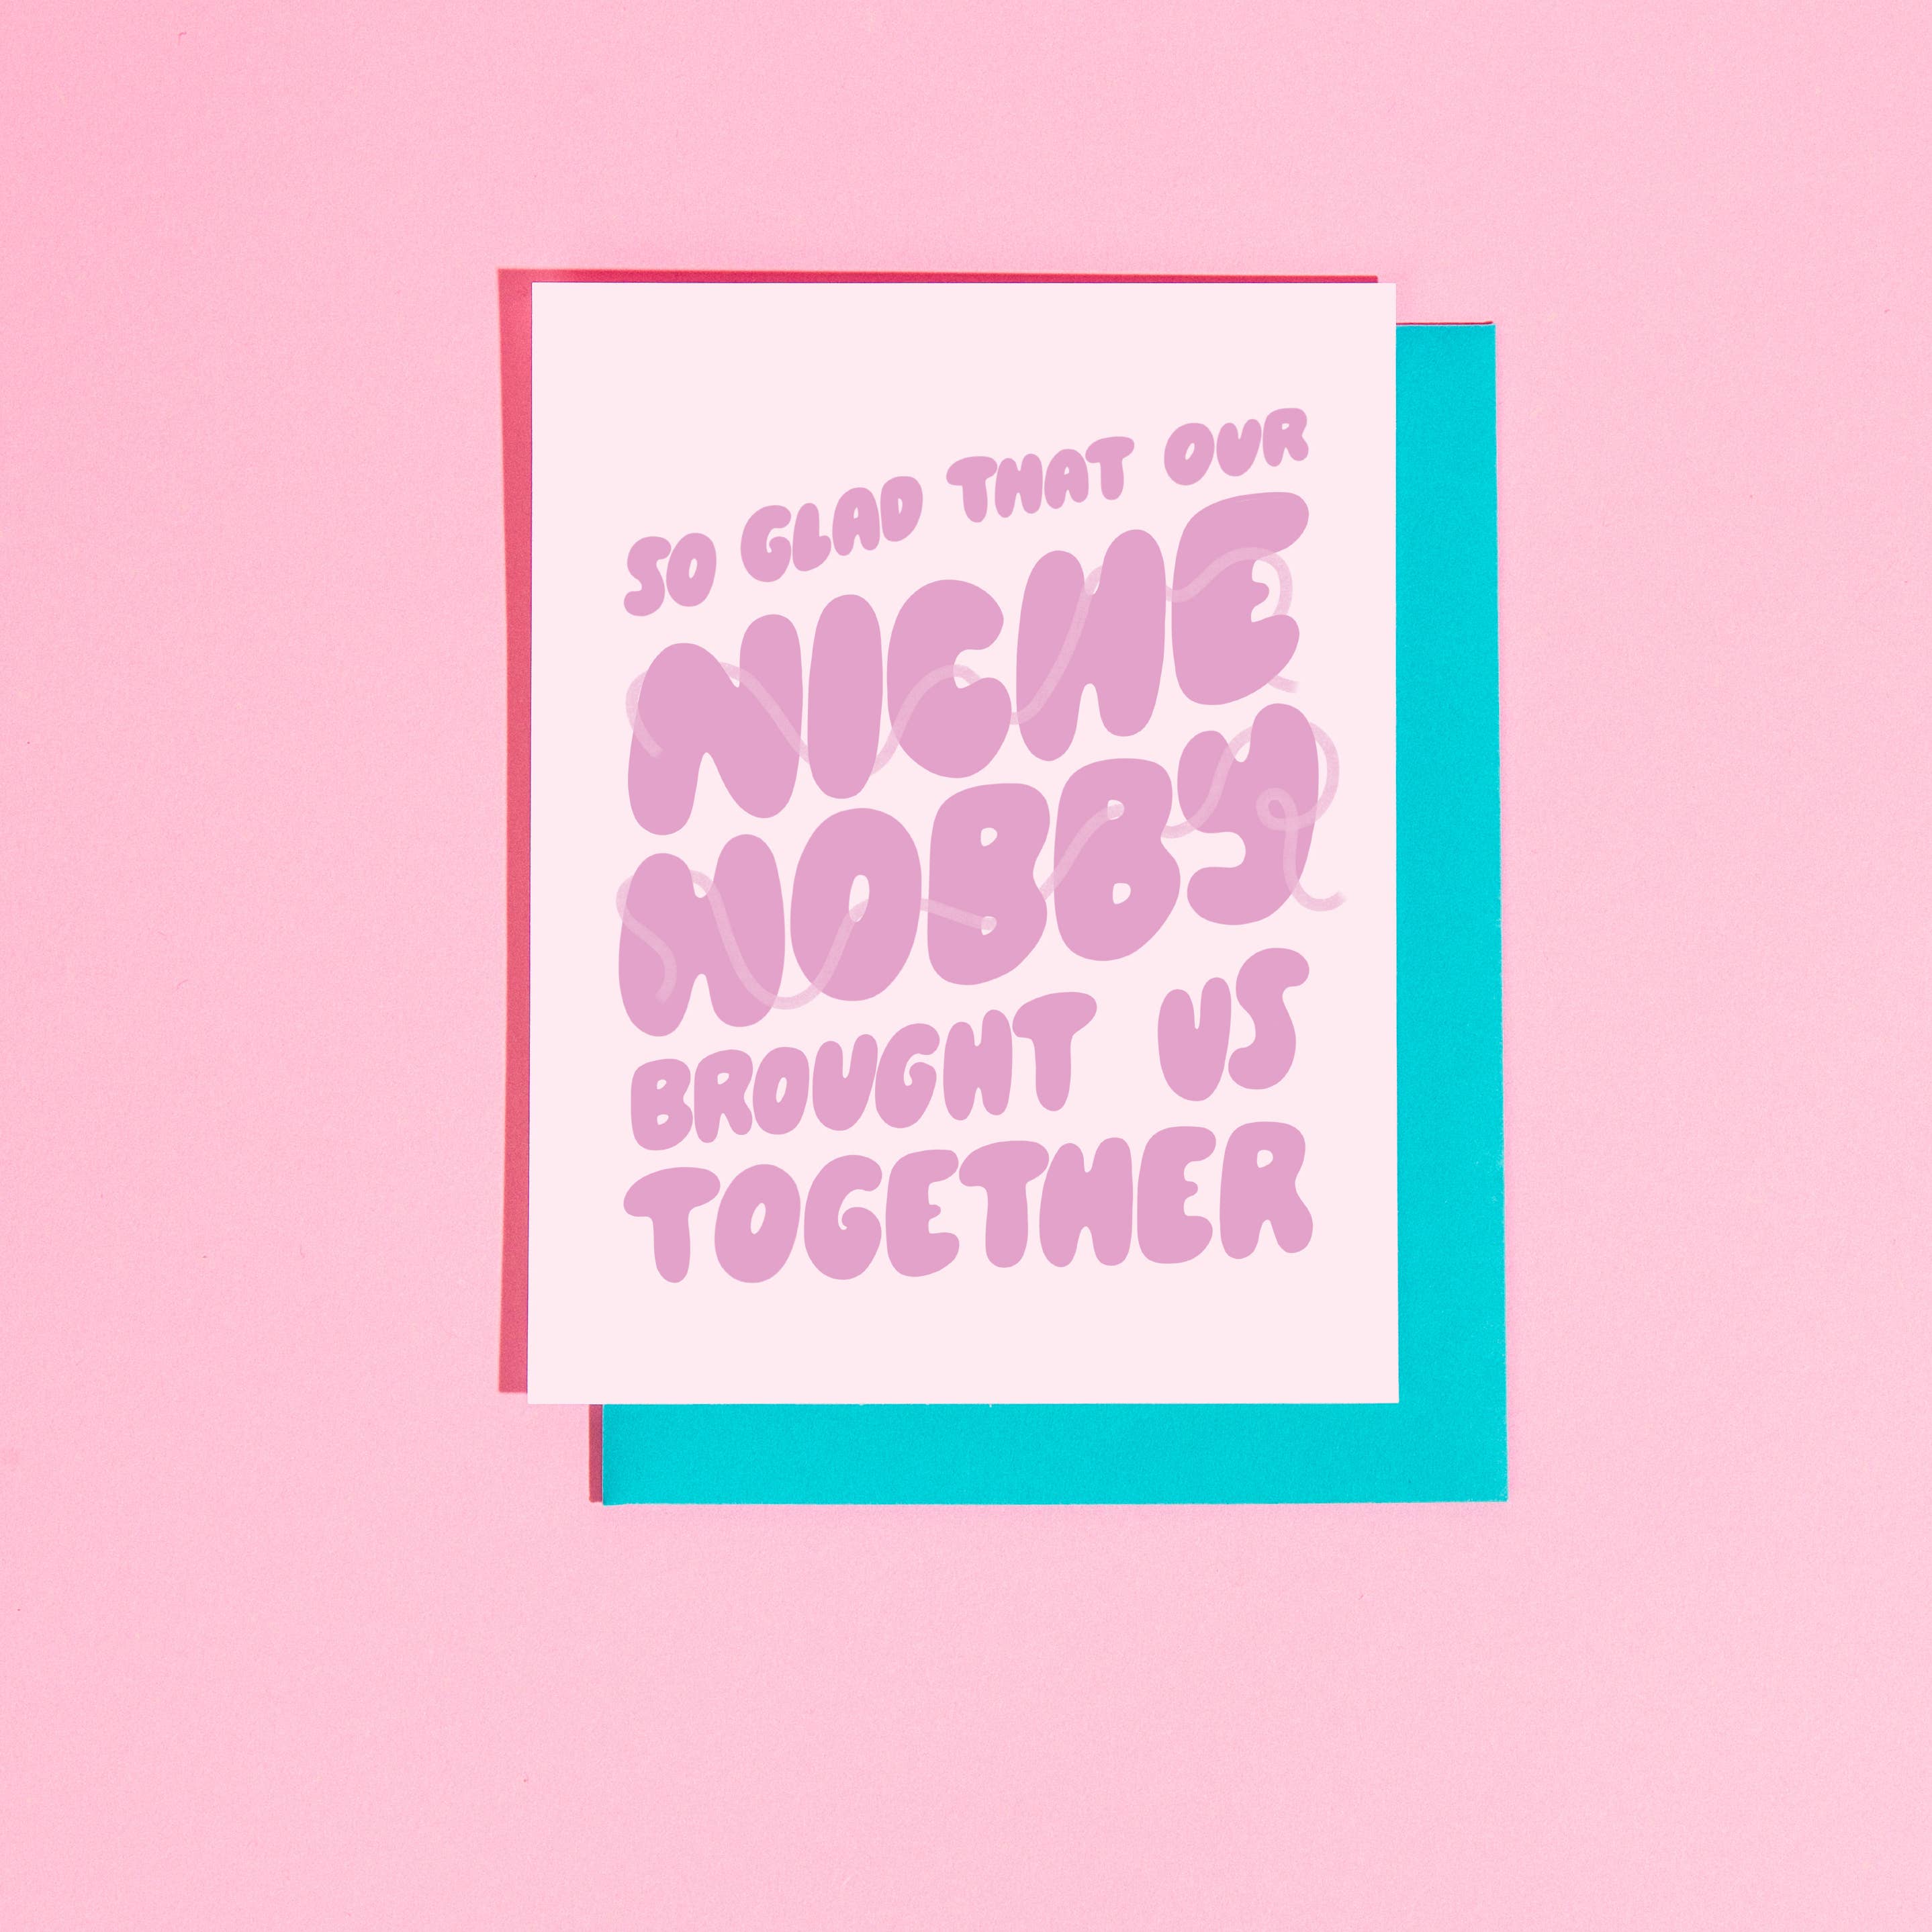 Glad Our Niche Hobby Brought Us Together Greeting Card